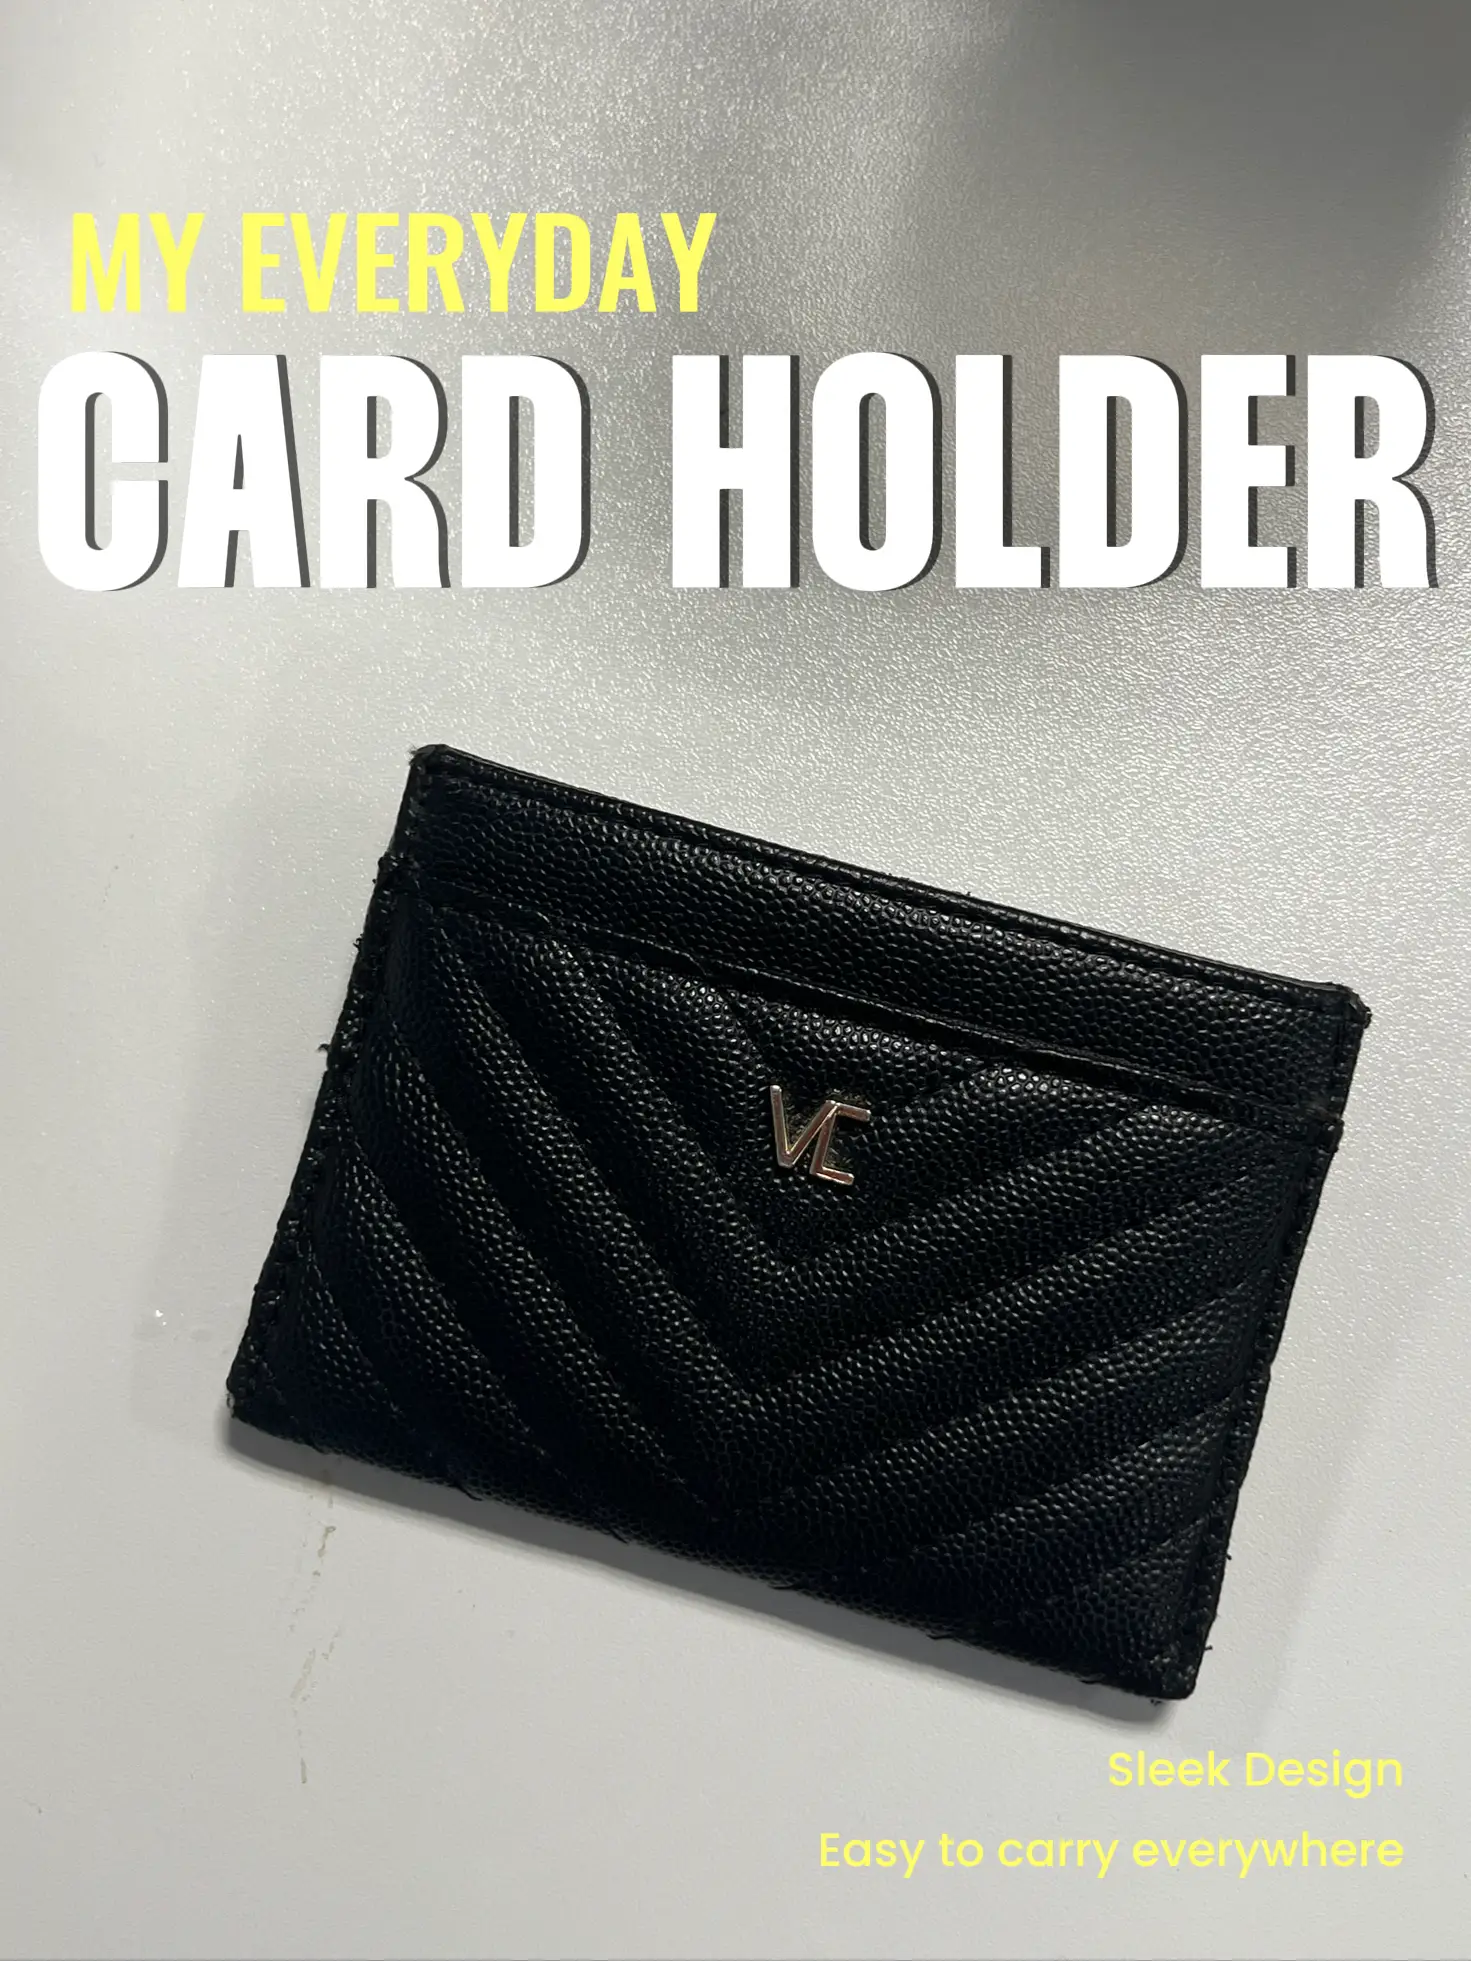 MY COLLECTION OF DESIGNER CARDHOLDERS, Gallery posted by michelleorgeta